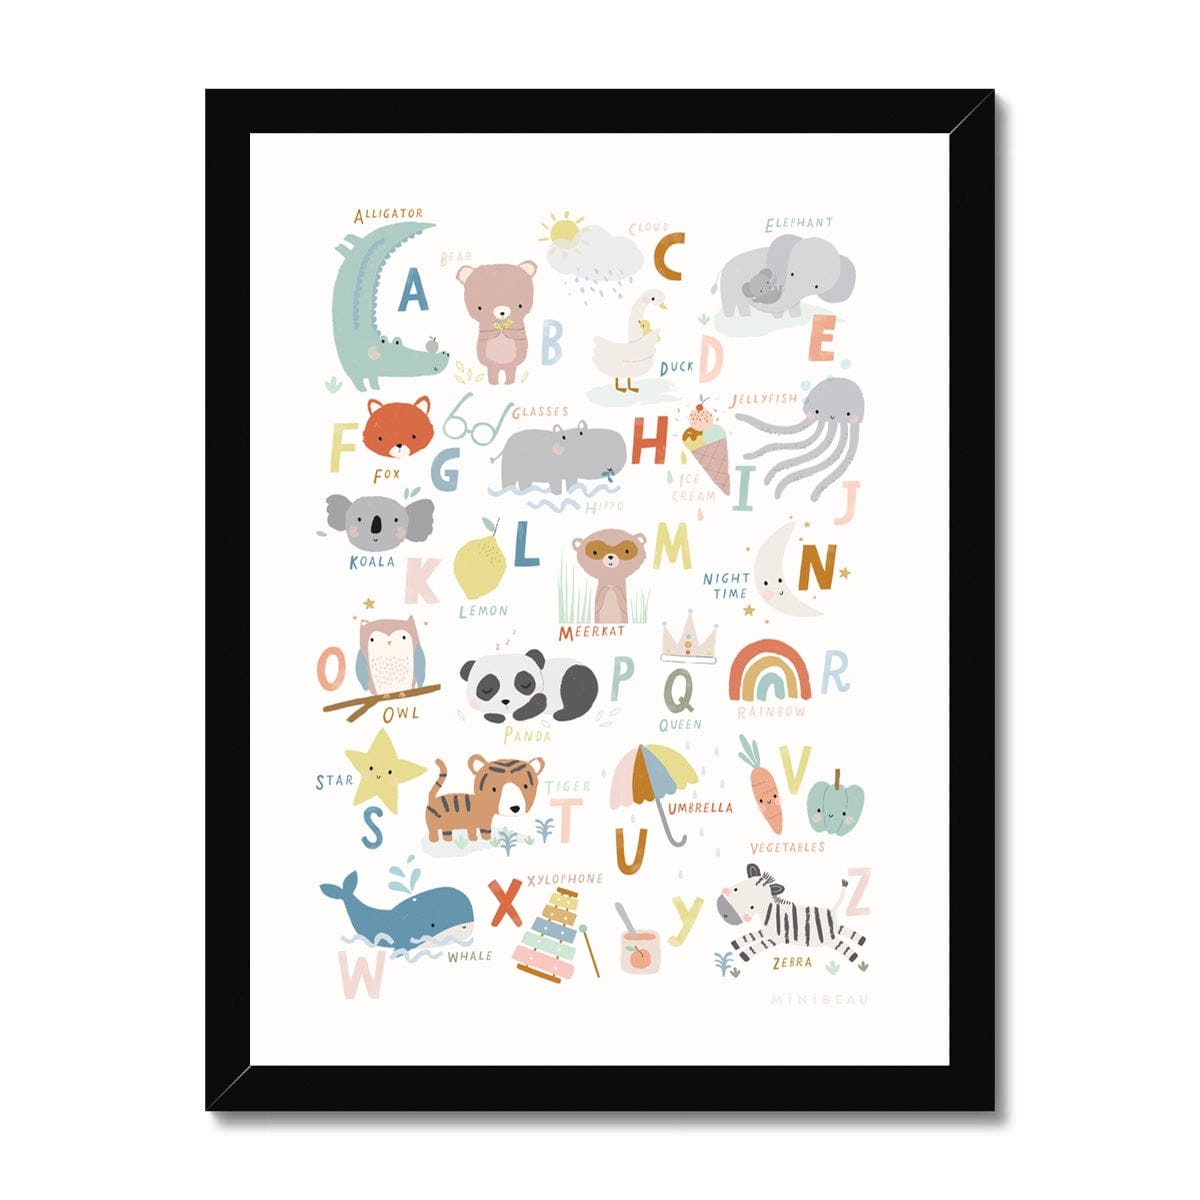 Art print in black frame. Our Cute animals Alphabet Art print features a variety cute animals and everyday items in soft tones, representing every letter of the alphabet. The print includes everything from a rainbow and elephant to a star and panda, all set against a clean white background.